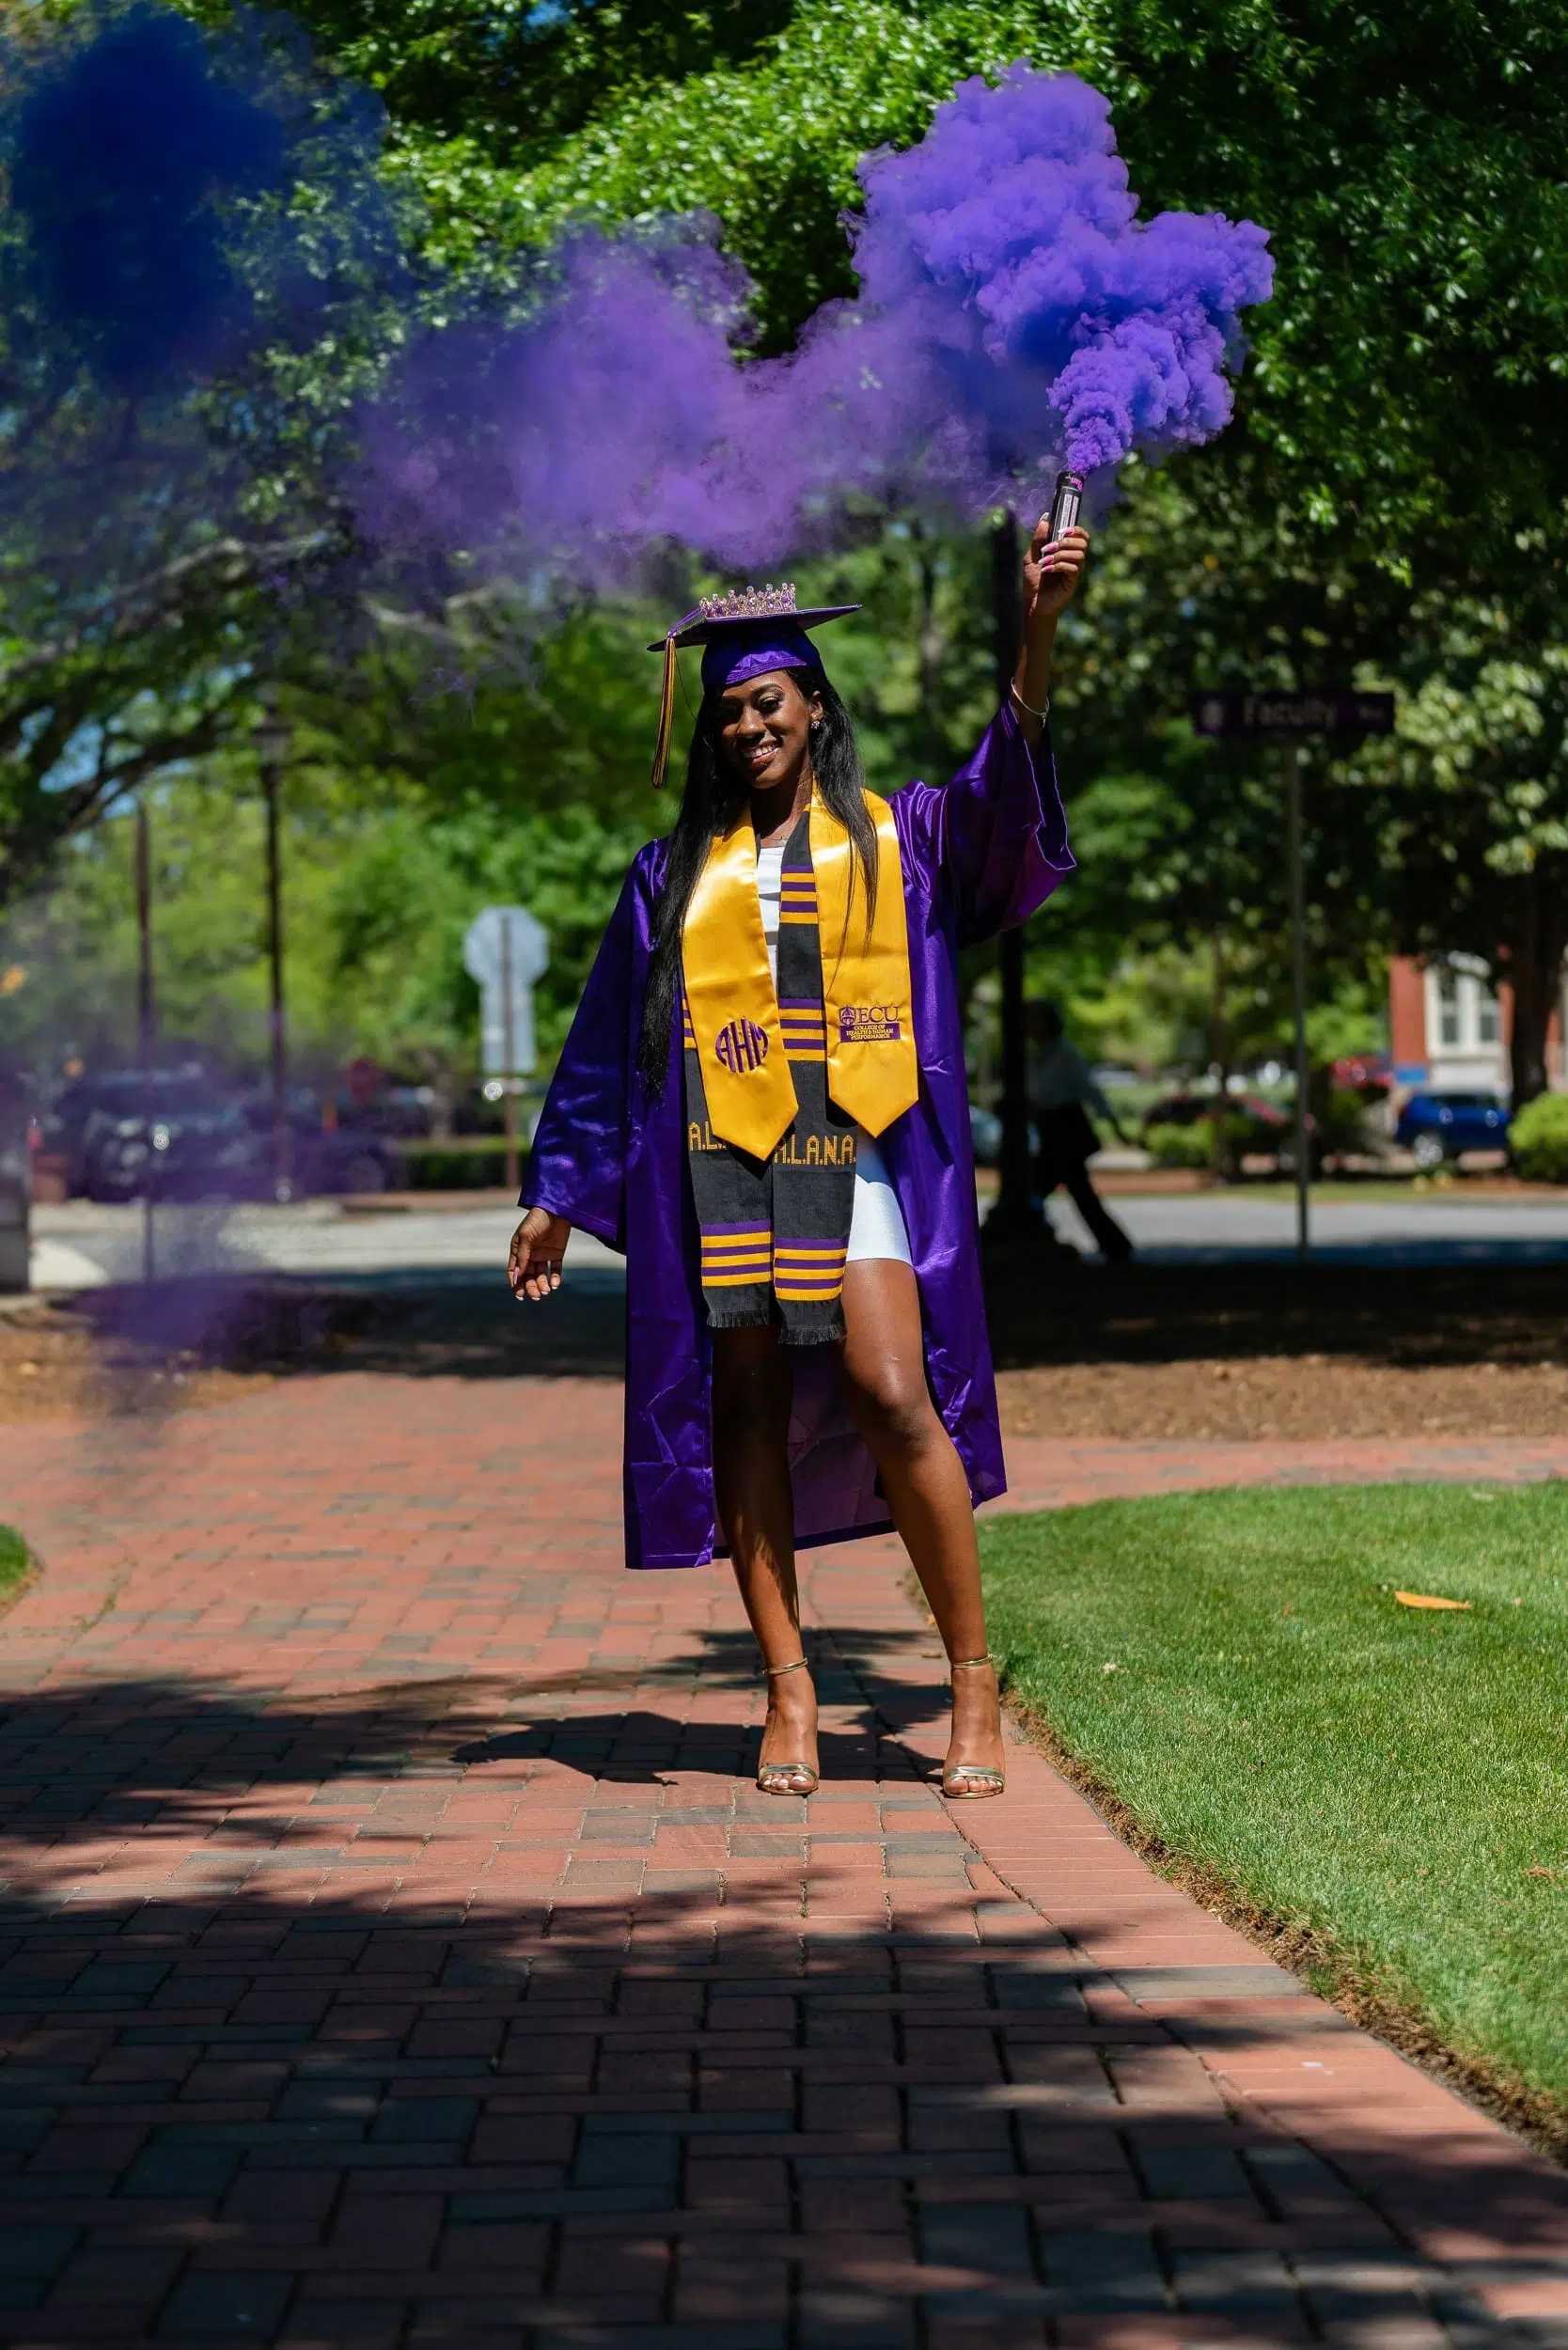 Woman wearing her cap and gown for East Carolina University (ECU) and posing for her graduation photos, while also using a purple smoke bomb.